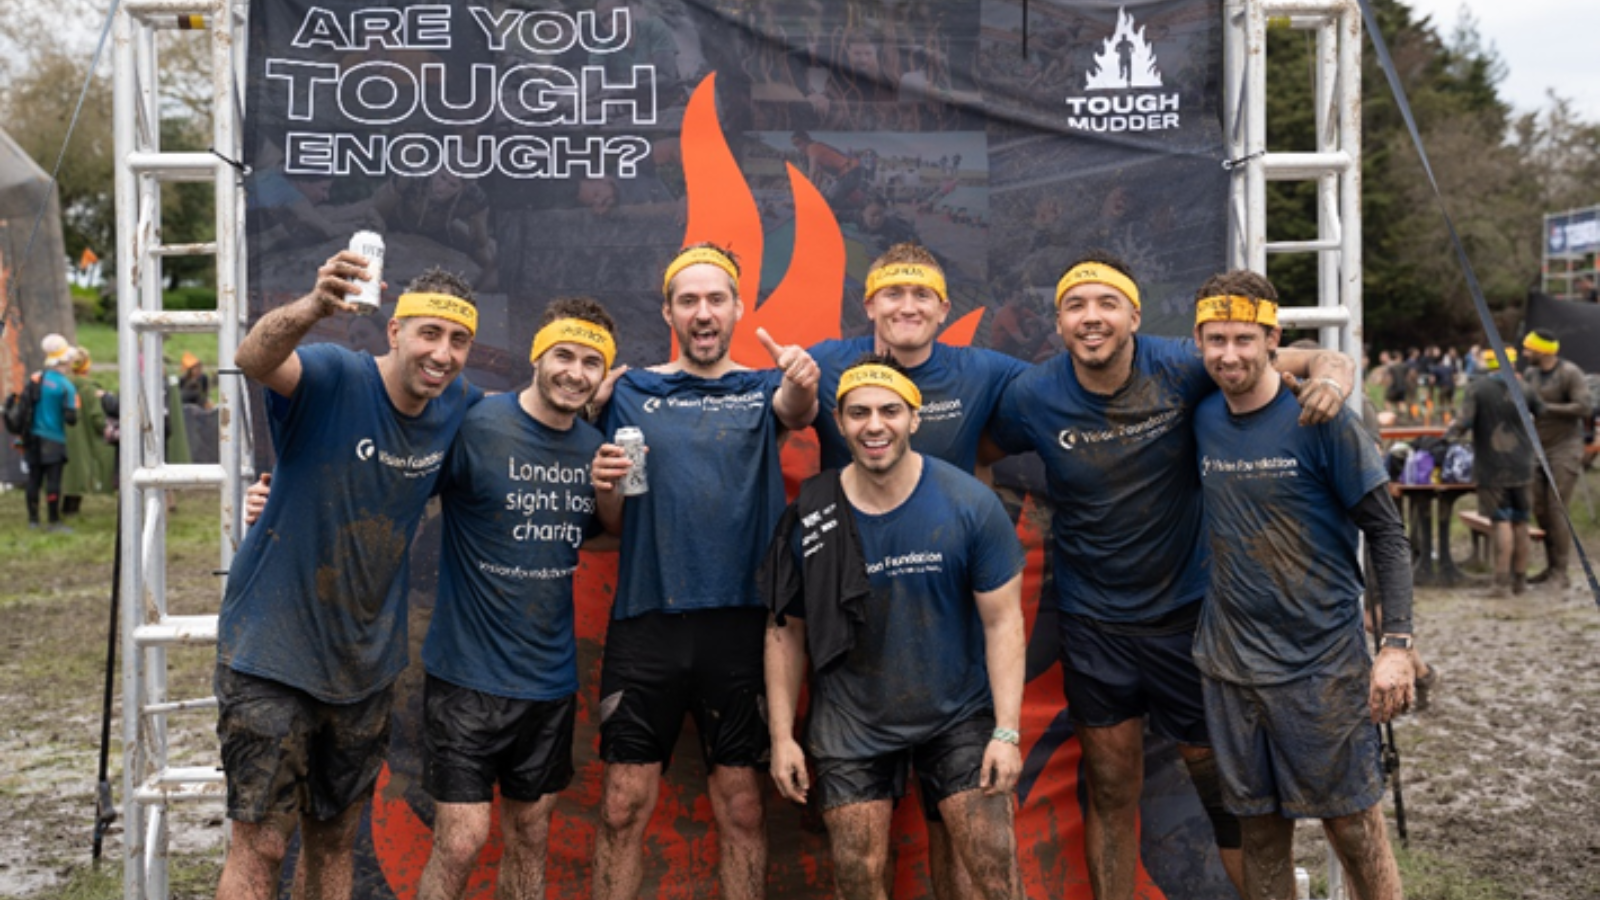 Seven men in vision foundation shirts and yellow bandanas standing in front of an 'are you tough enough?' Tough Mudder promotional banner. They're all grinning and covered in mud.